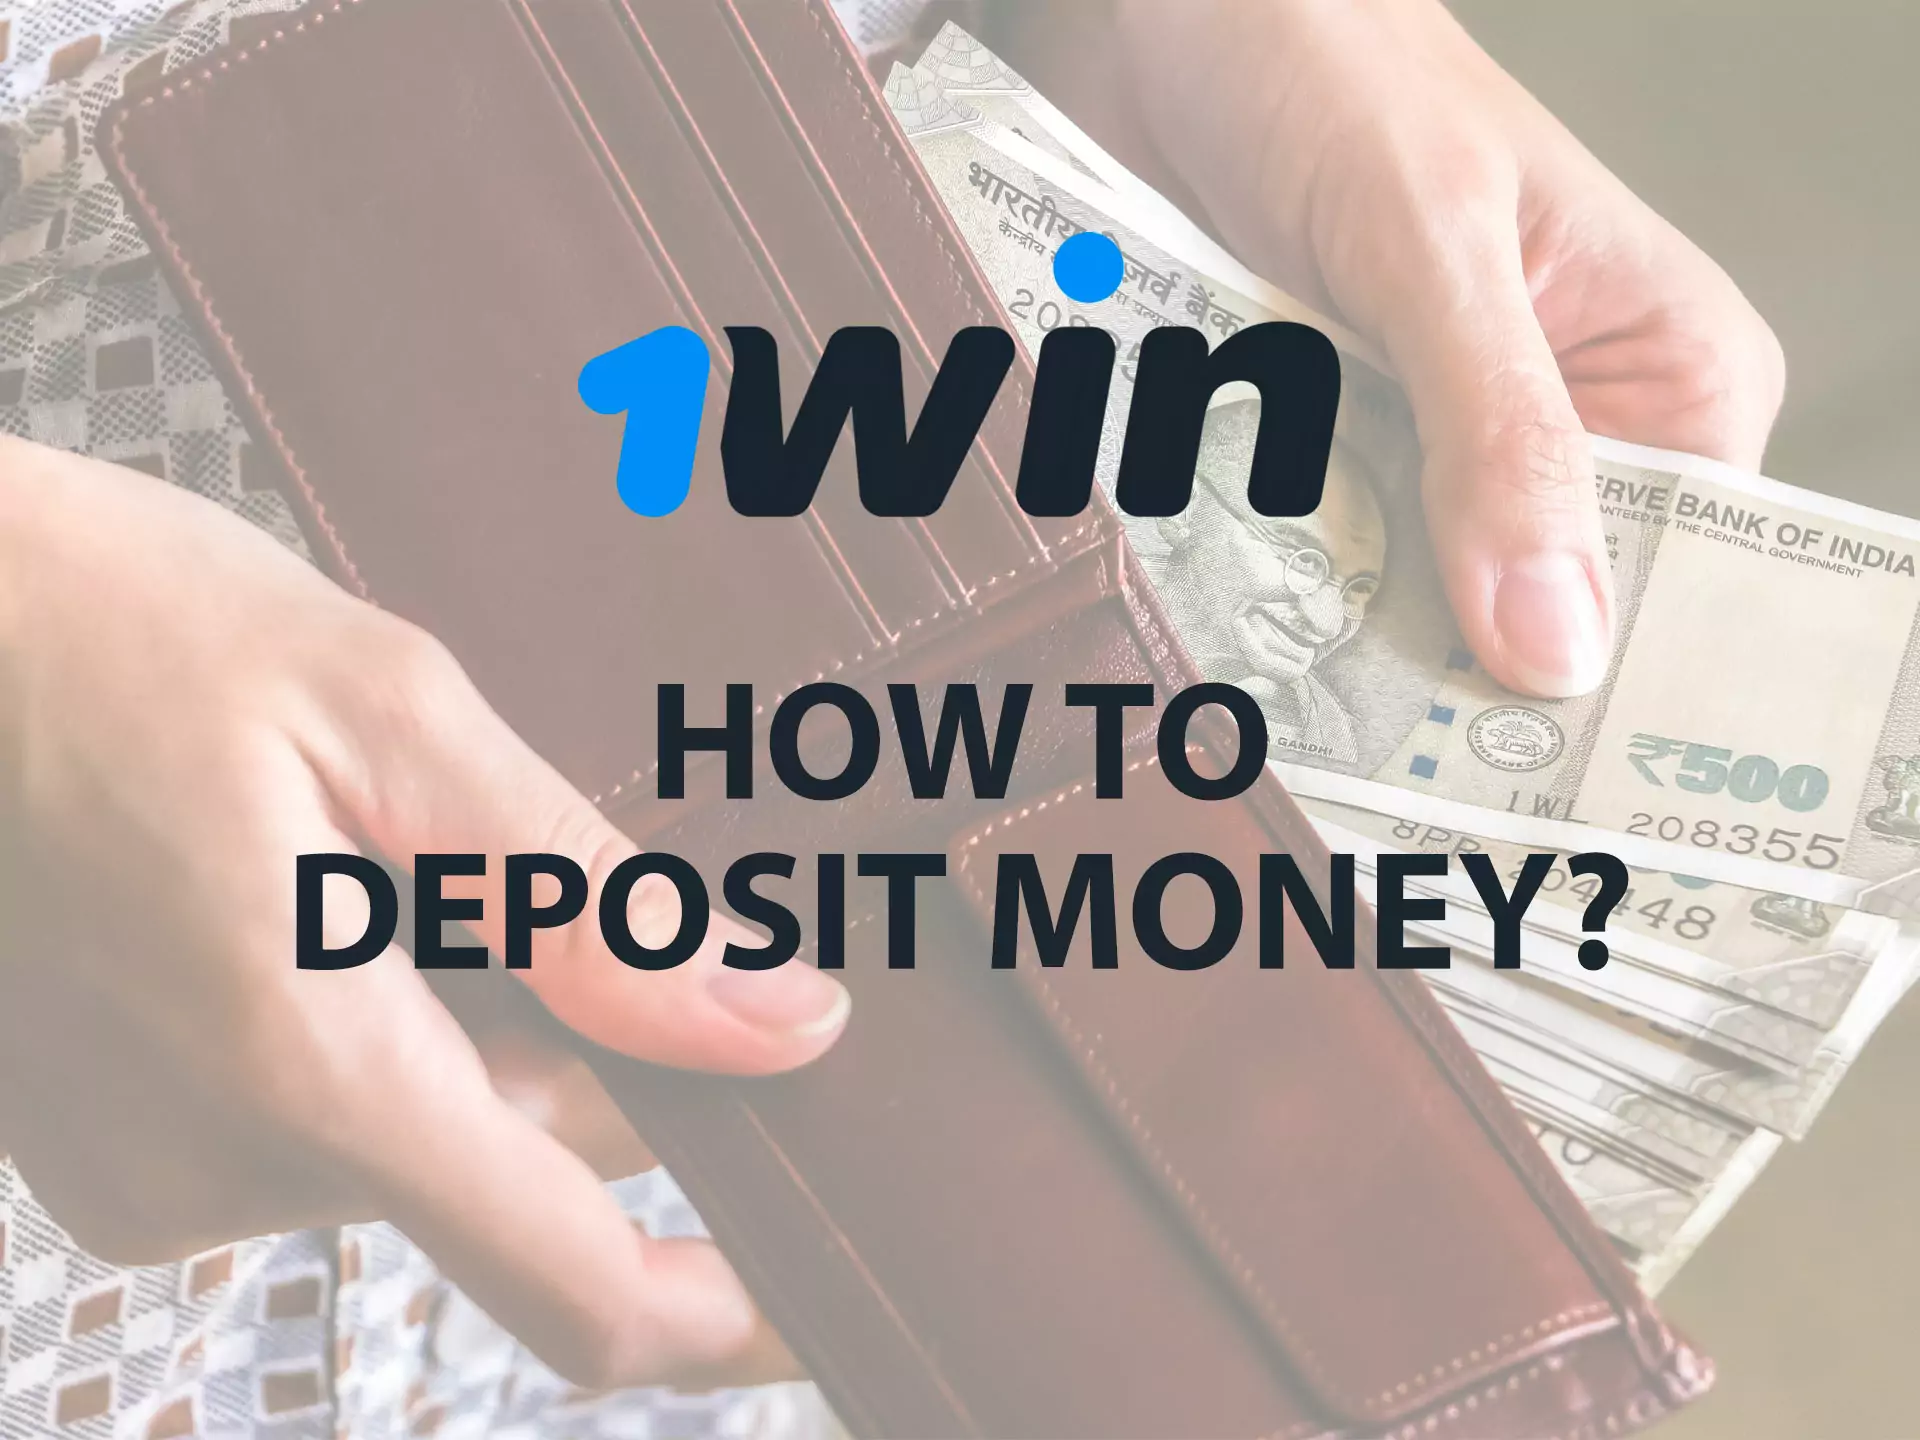 To deposit money you should register at 1win.